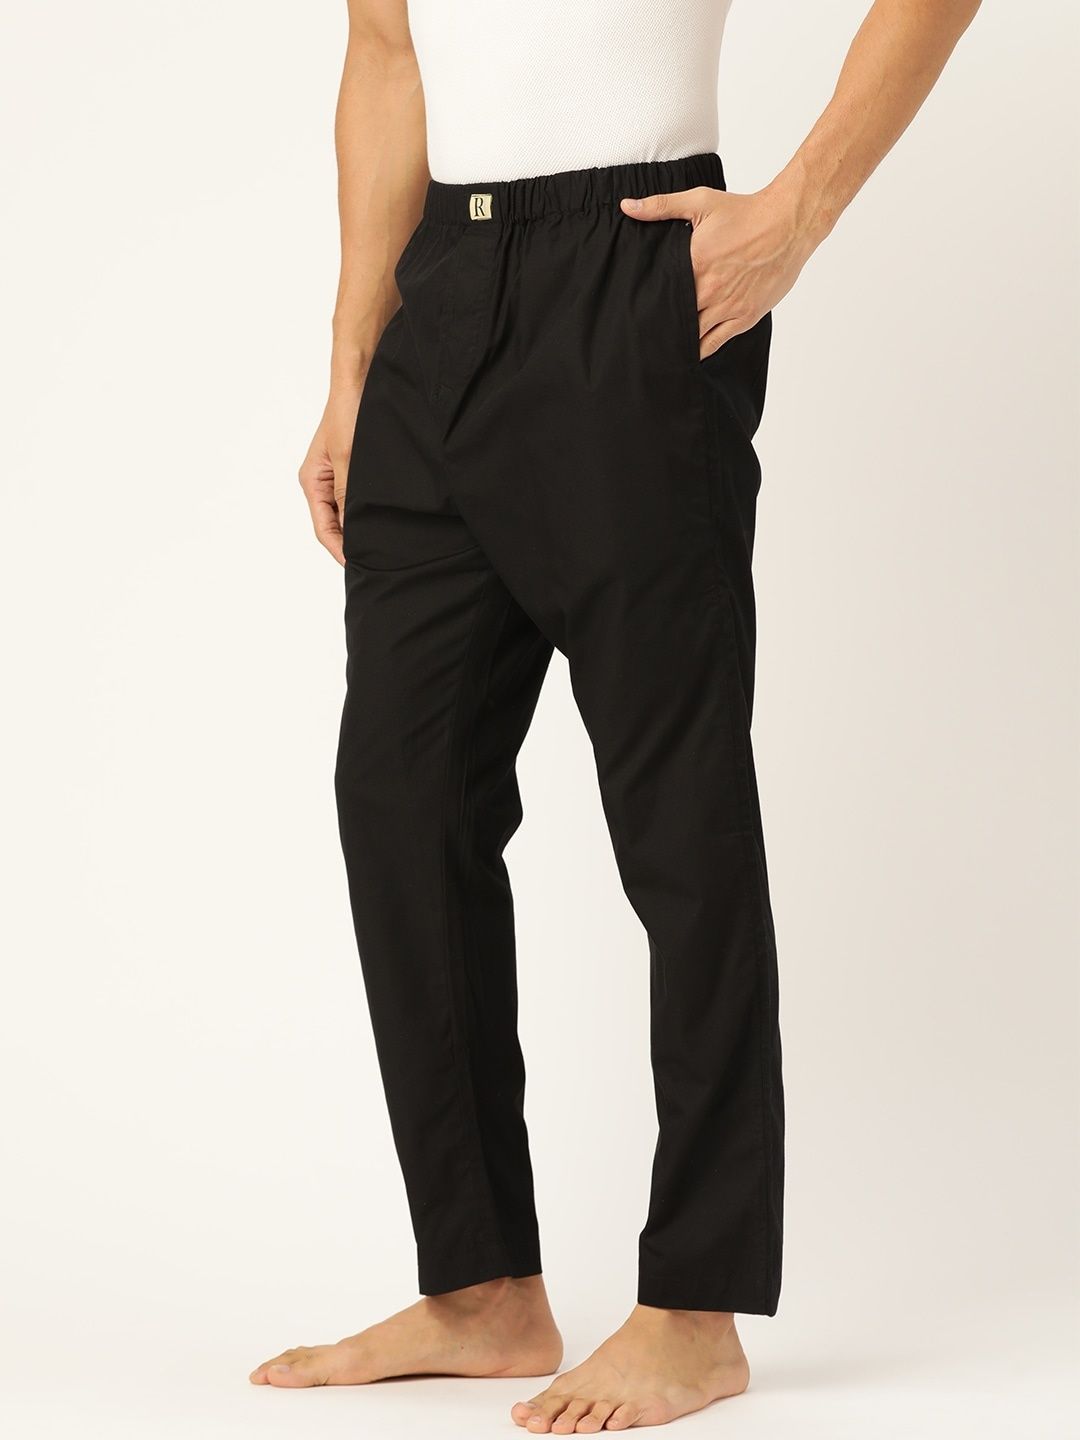 Black Pure Cotton Elastic Lounge Wear Pajama Pant Online In India